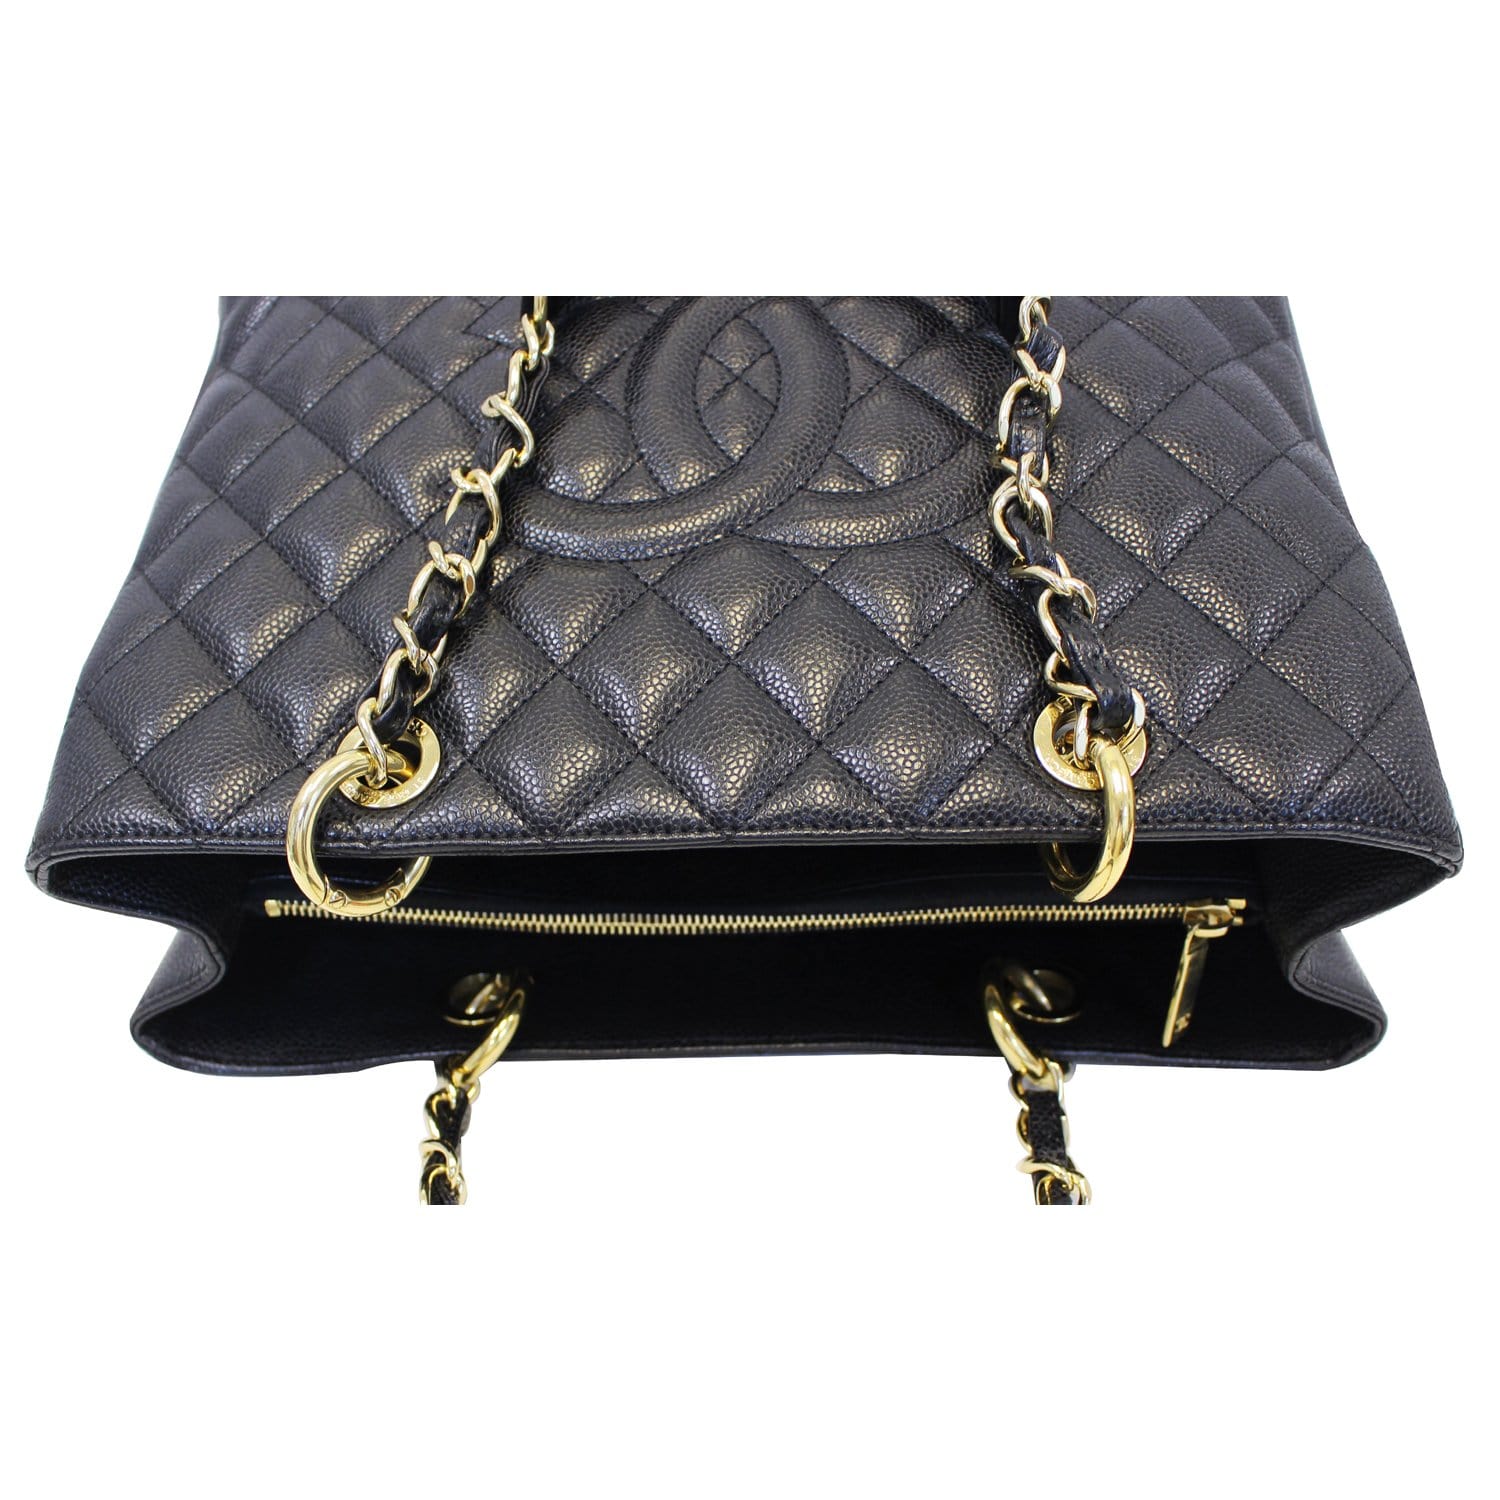 Chanel Grand Shopping Leather Black - Chanel Tote Bag